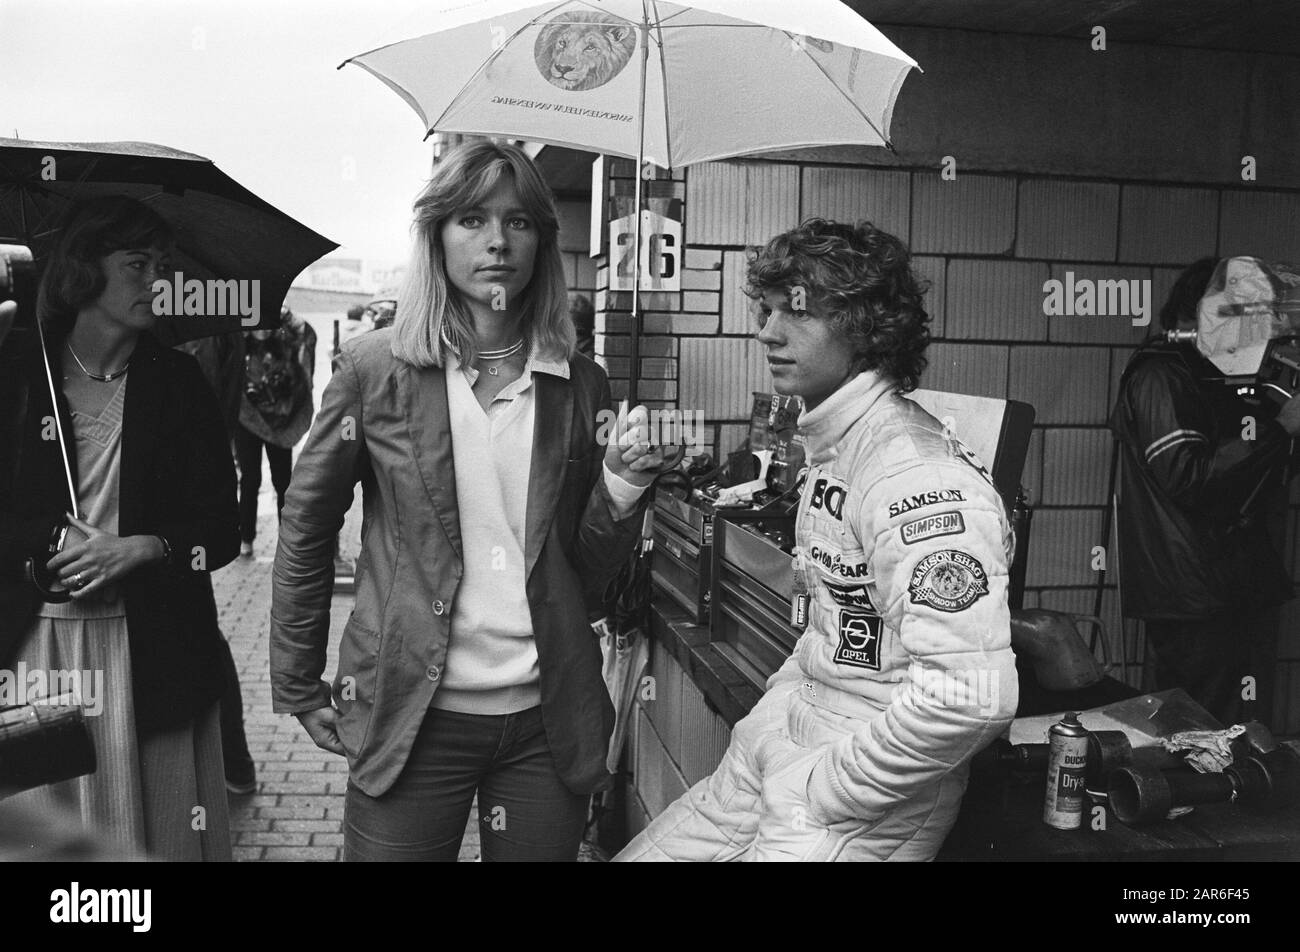 A girl holding umbrella over the head of Jan Lammers at the Dutch Grand Prix in Zandvoort on 24 August 1979.